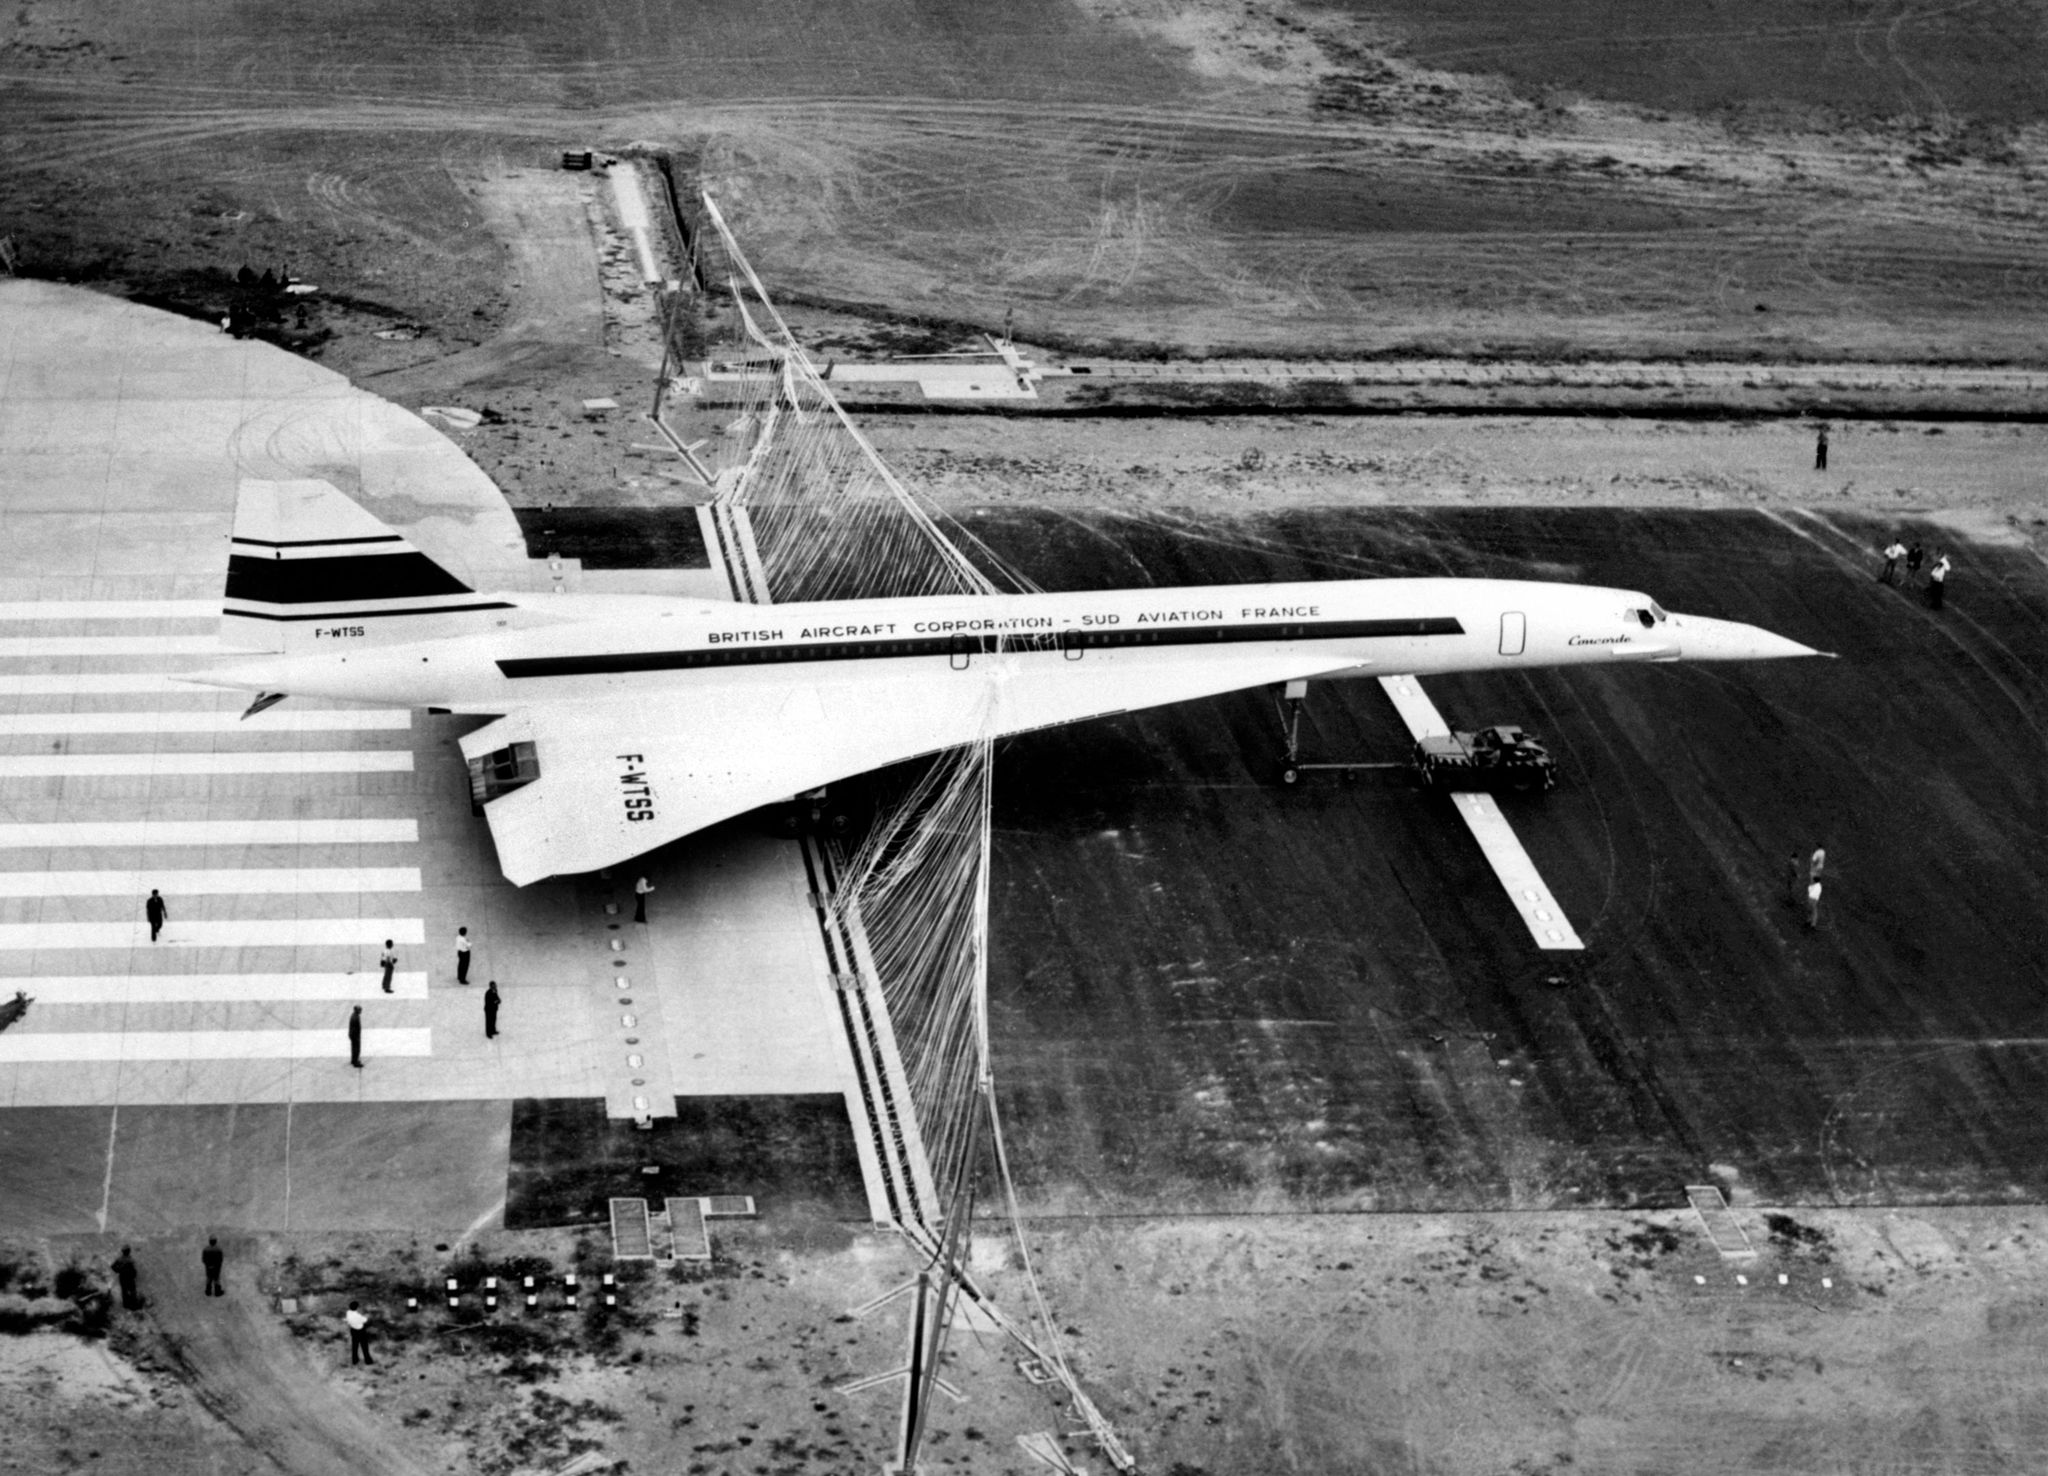 concorde 001 lands in an arresting fence during a test flight in toulouse france on september 18 1968